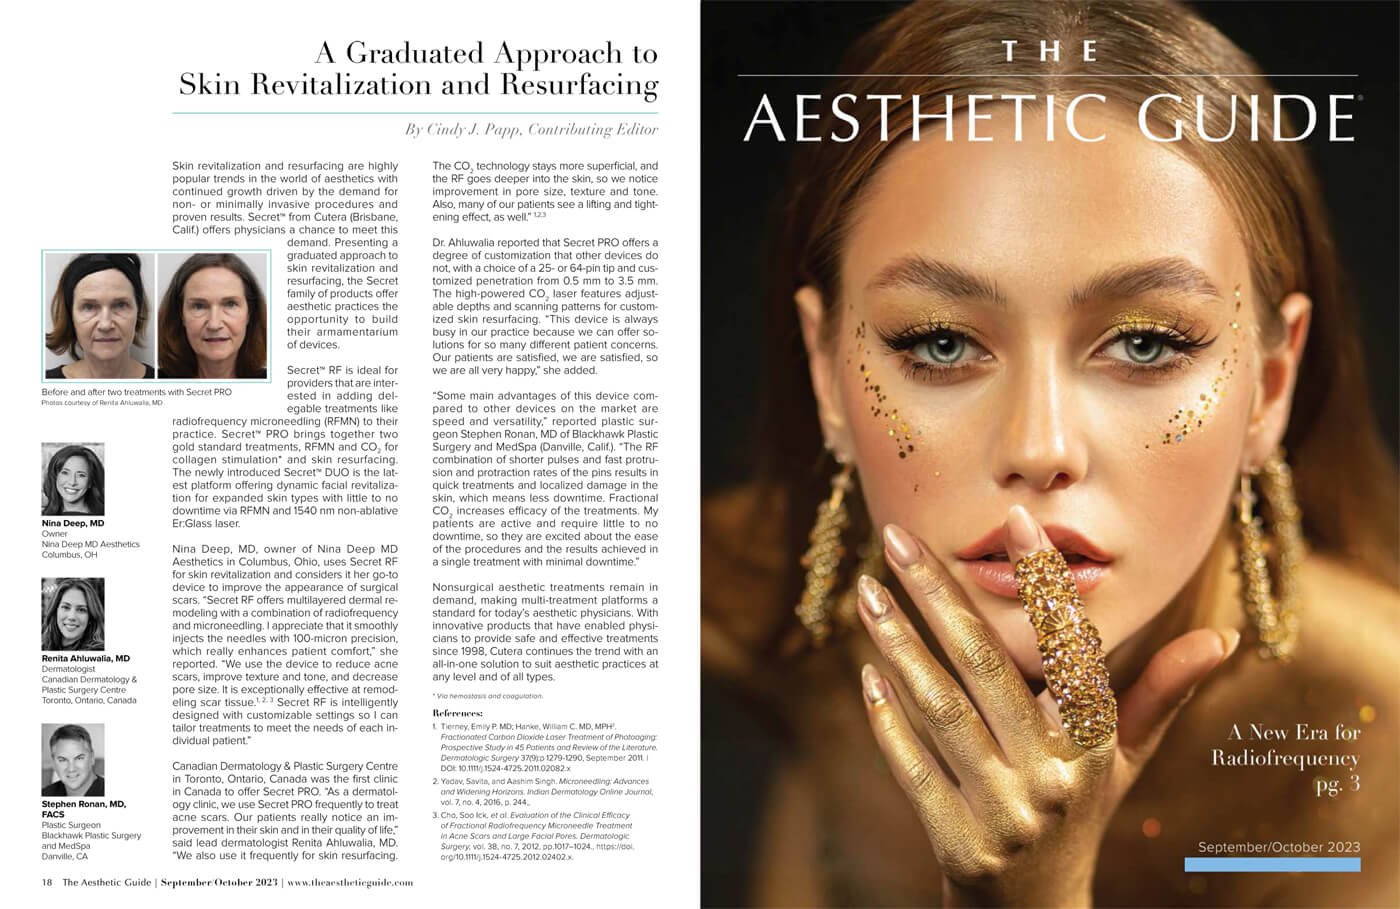 View Page 18 of the September/October 2023 edition of The Aesthetic Guide